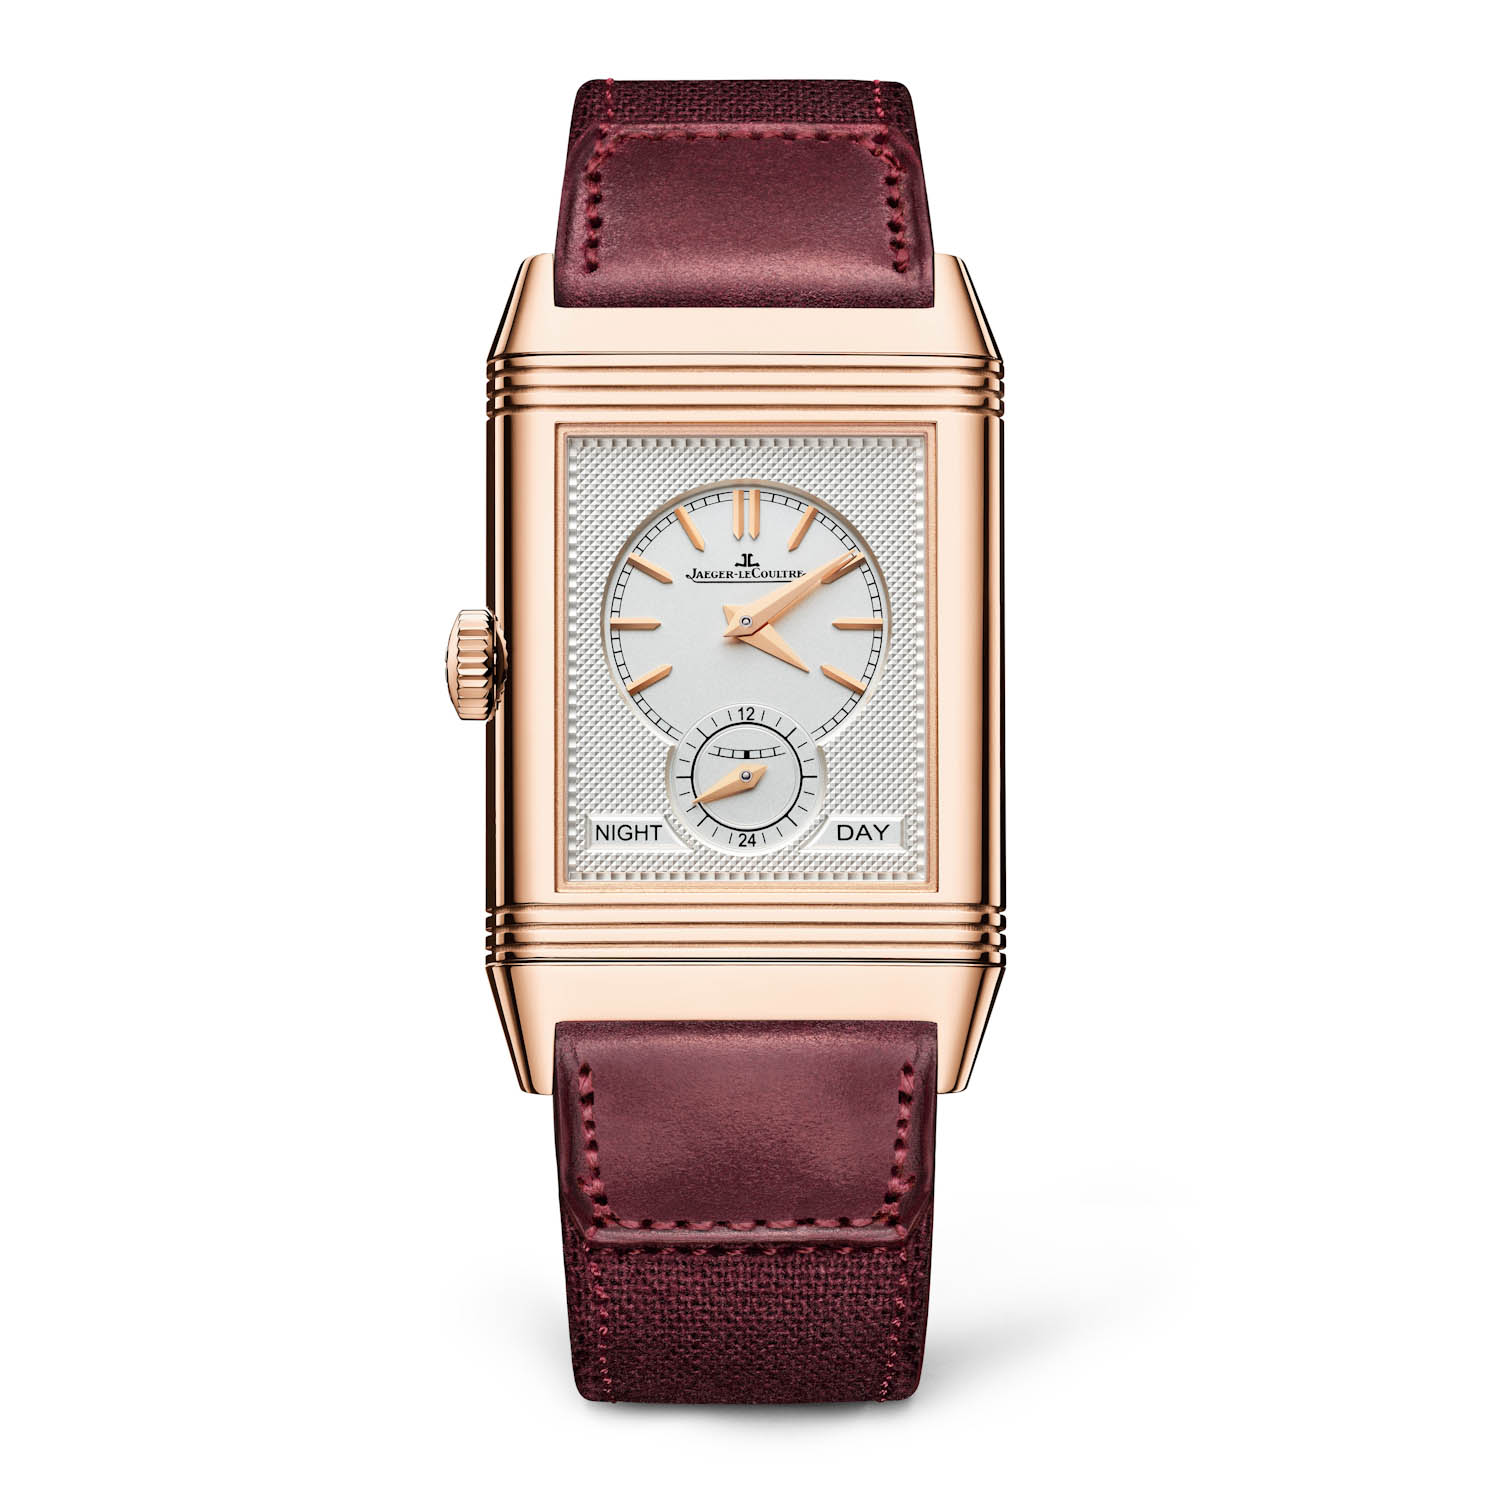 Reverso Tribute Duoface Fagliano timeandwatches.pl